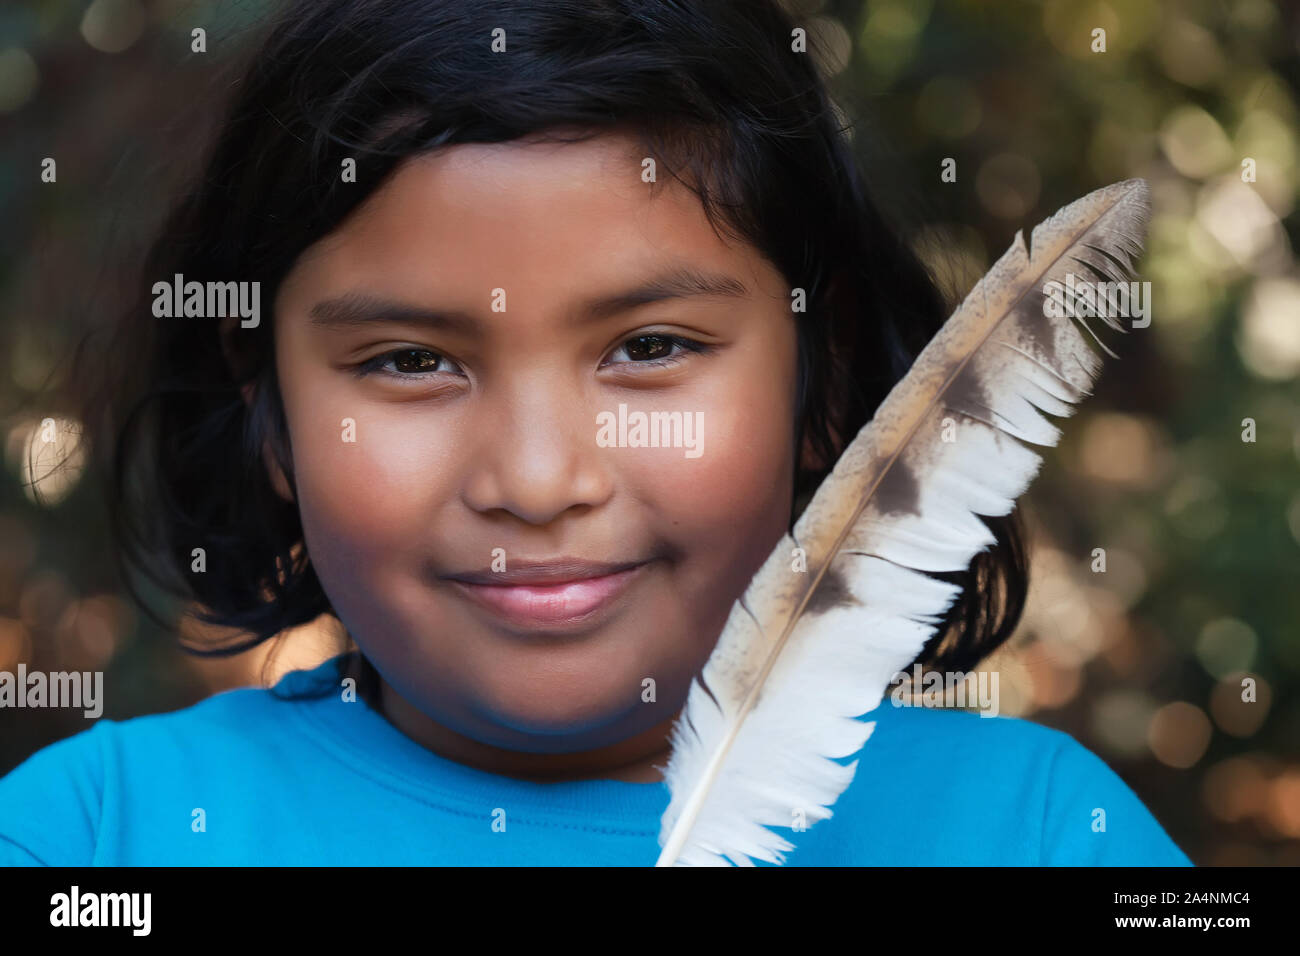 A beautiful little girl holding a spiritual feather; a symbol of flight and freedom. Stock Photo